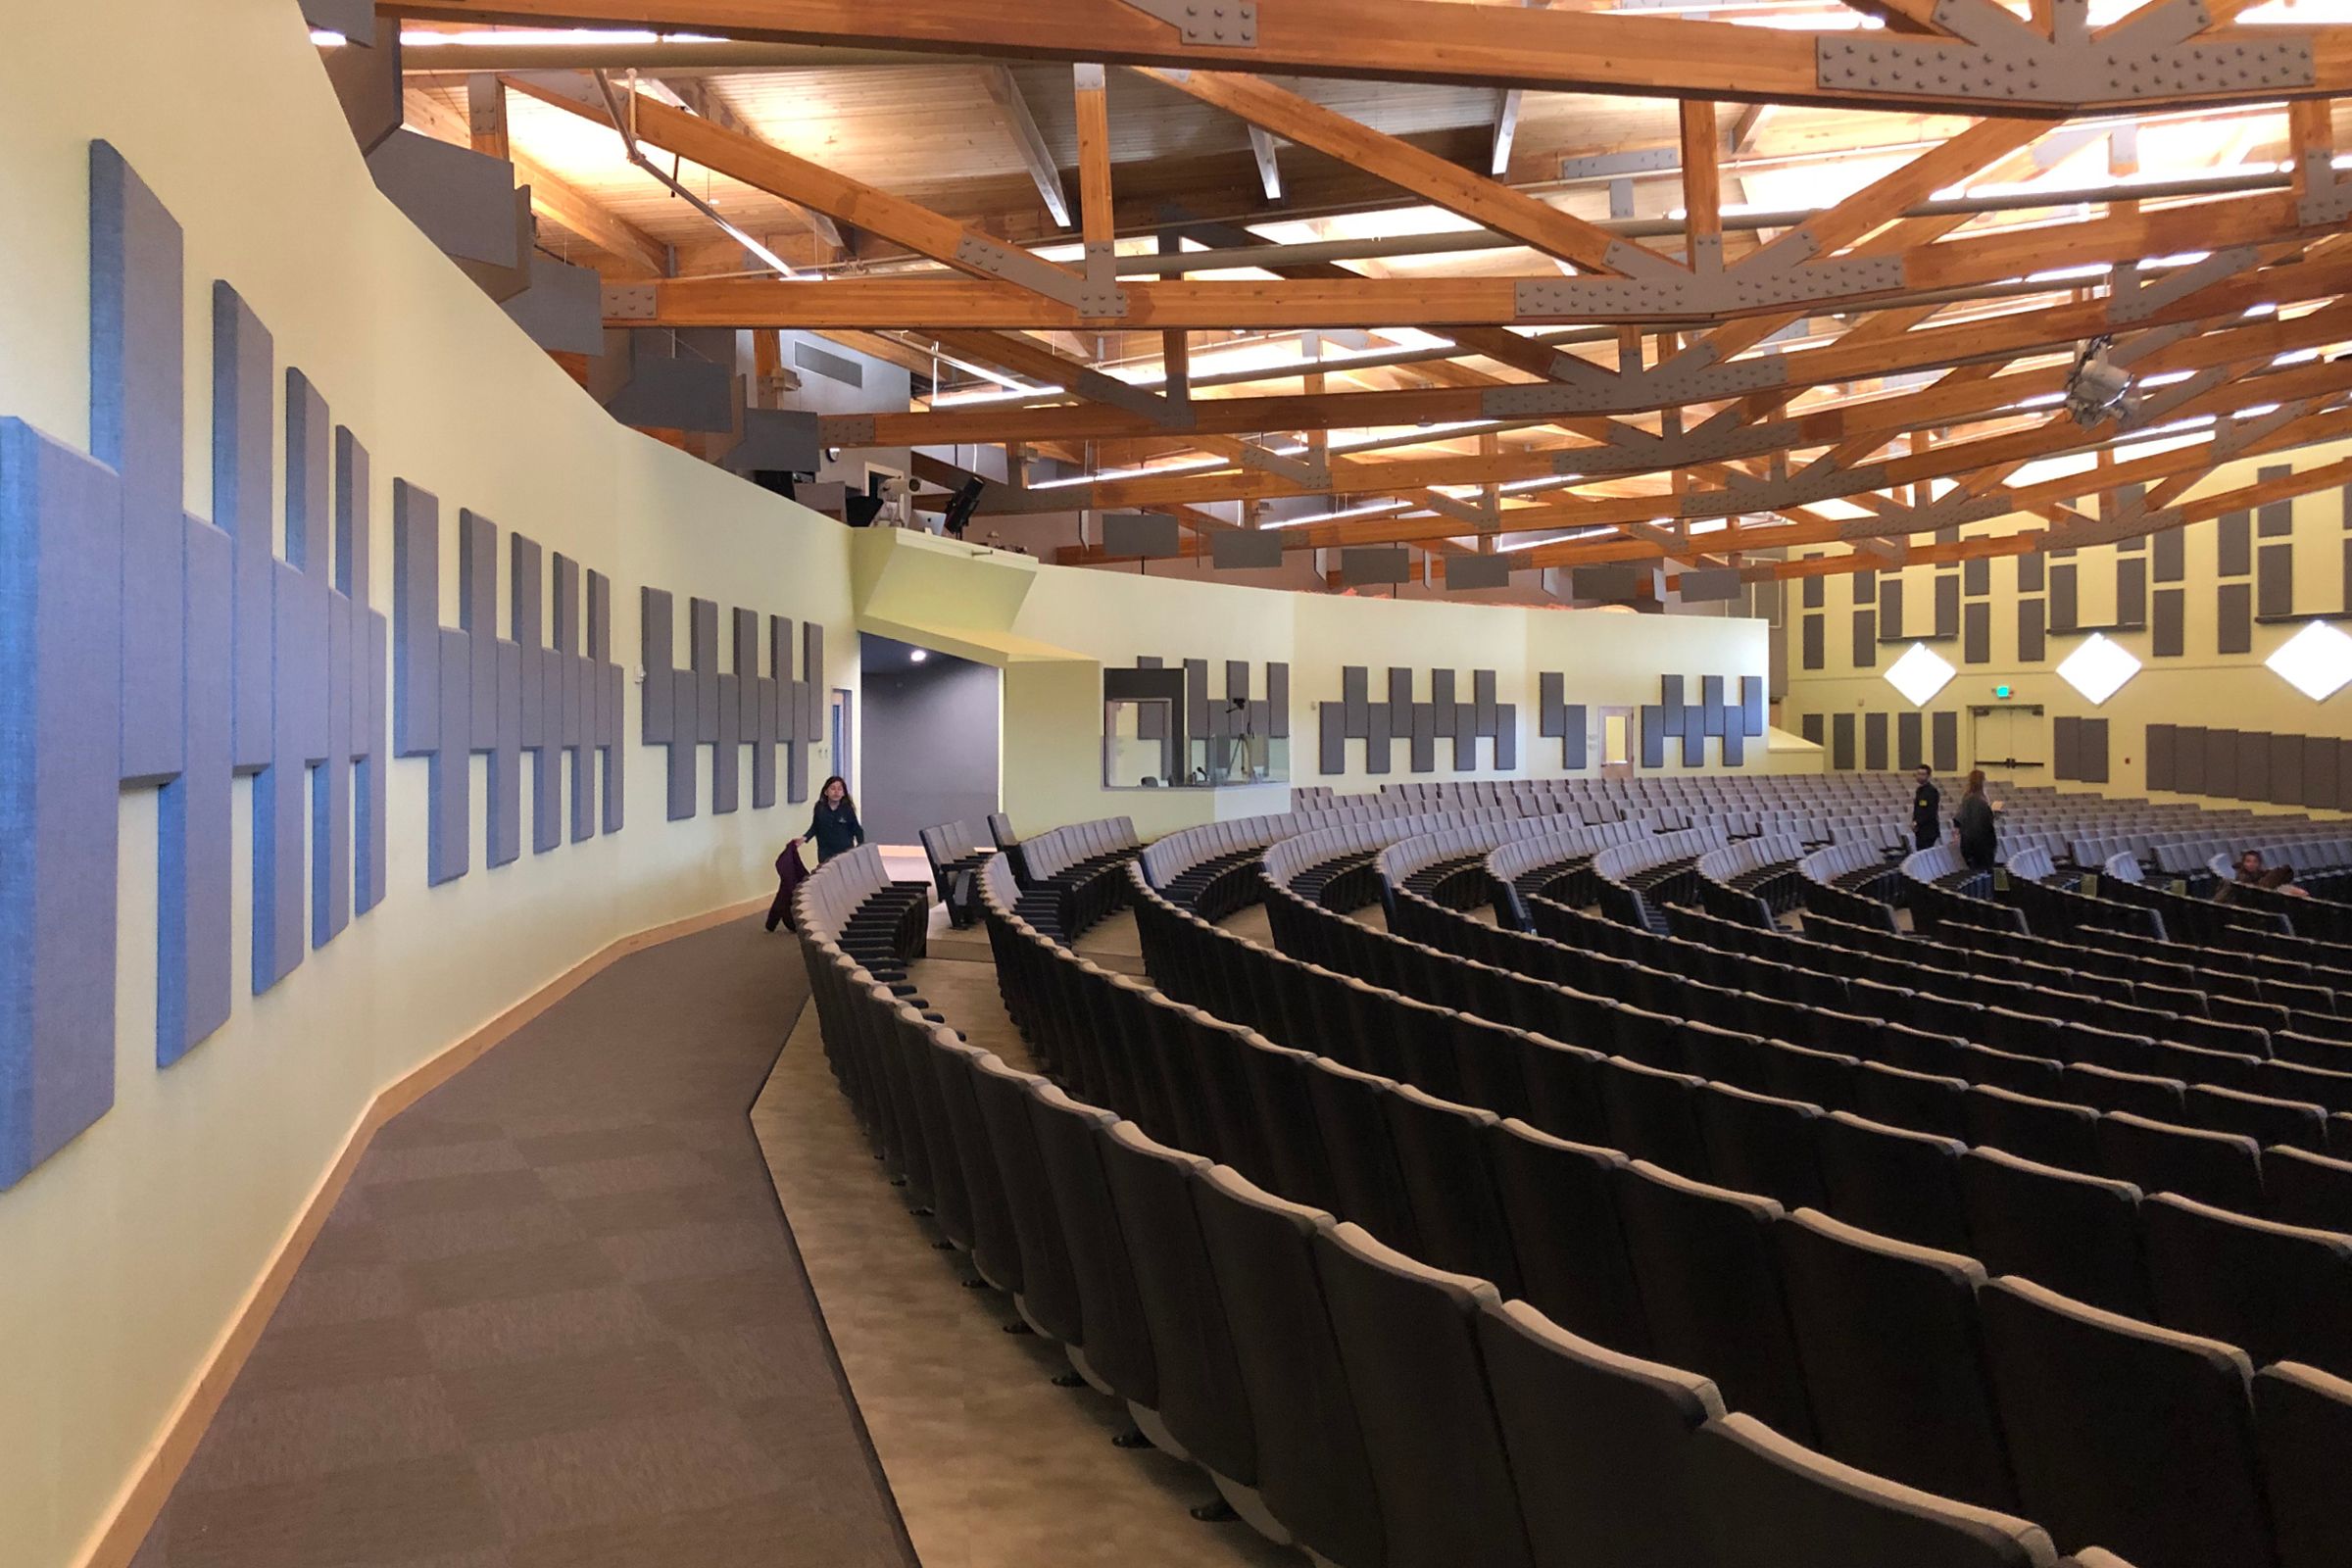 Acoustic panels on wall and ceiling at the Aspen Academy